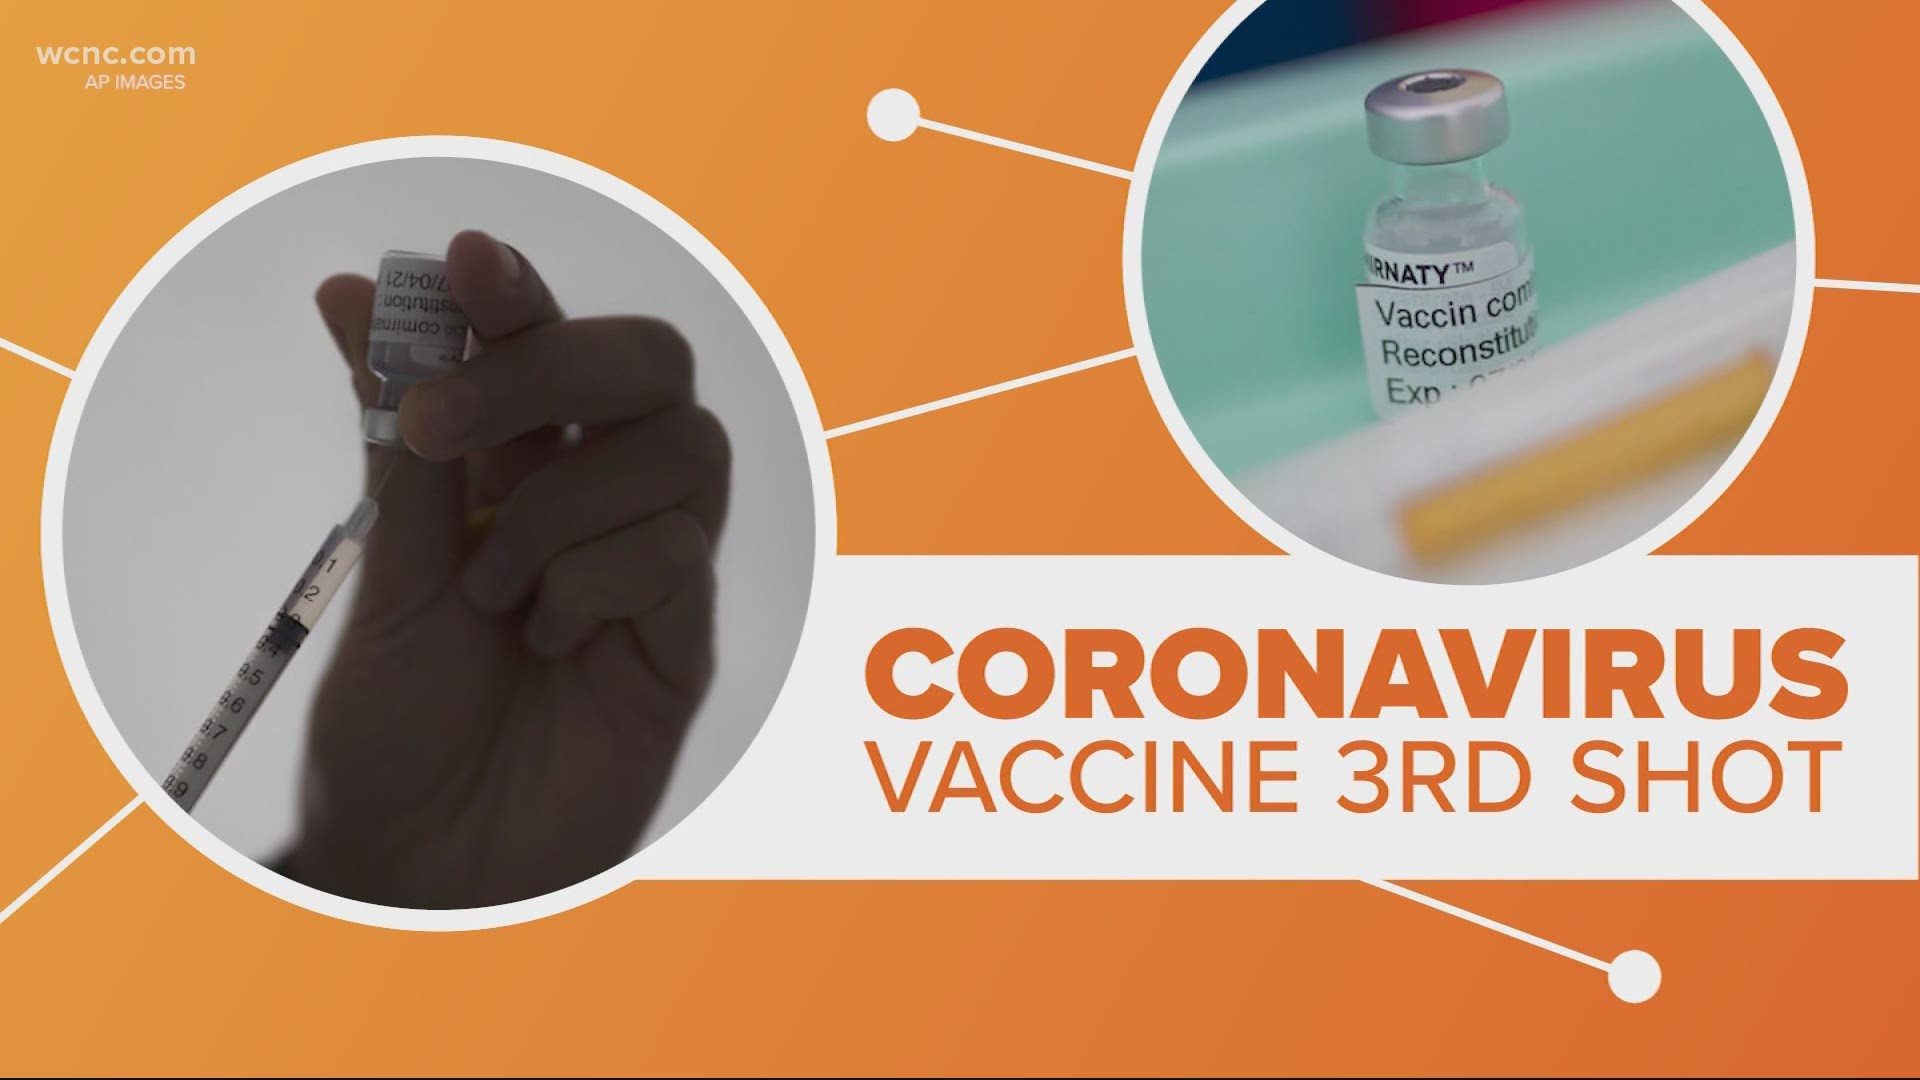 The CEO of Pfizer says a third dose of the COVID-19 vaccine will likely be needed within a year. But it's not because the first two doses aren't working.